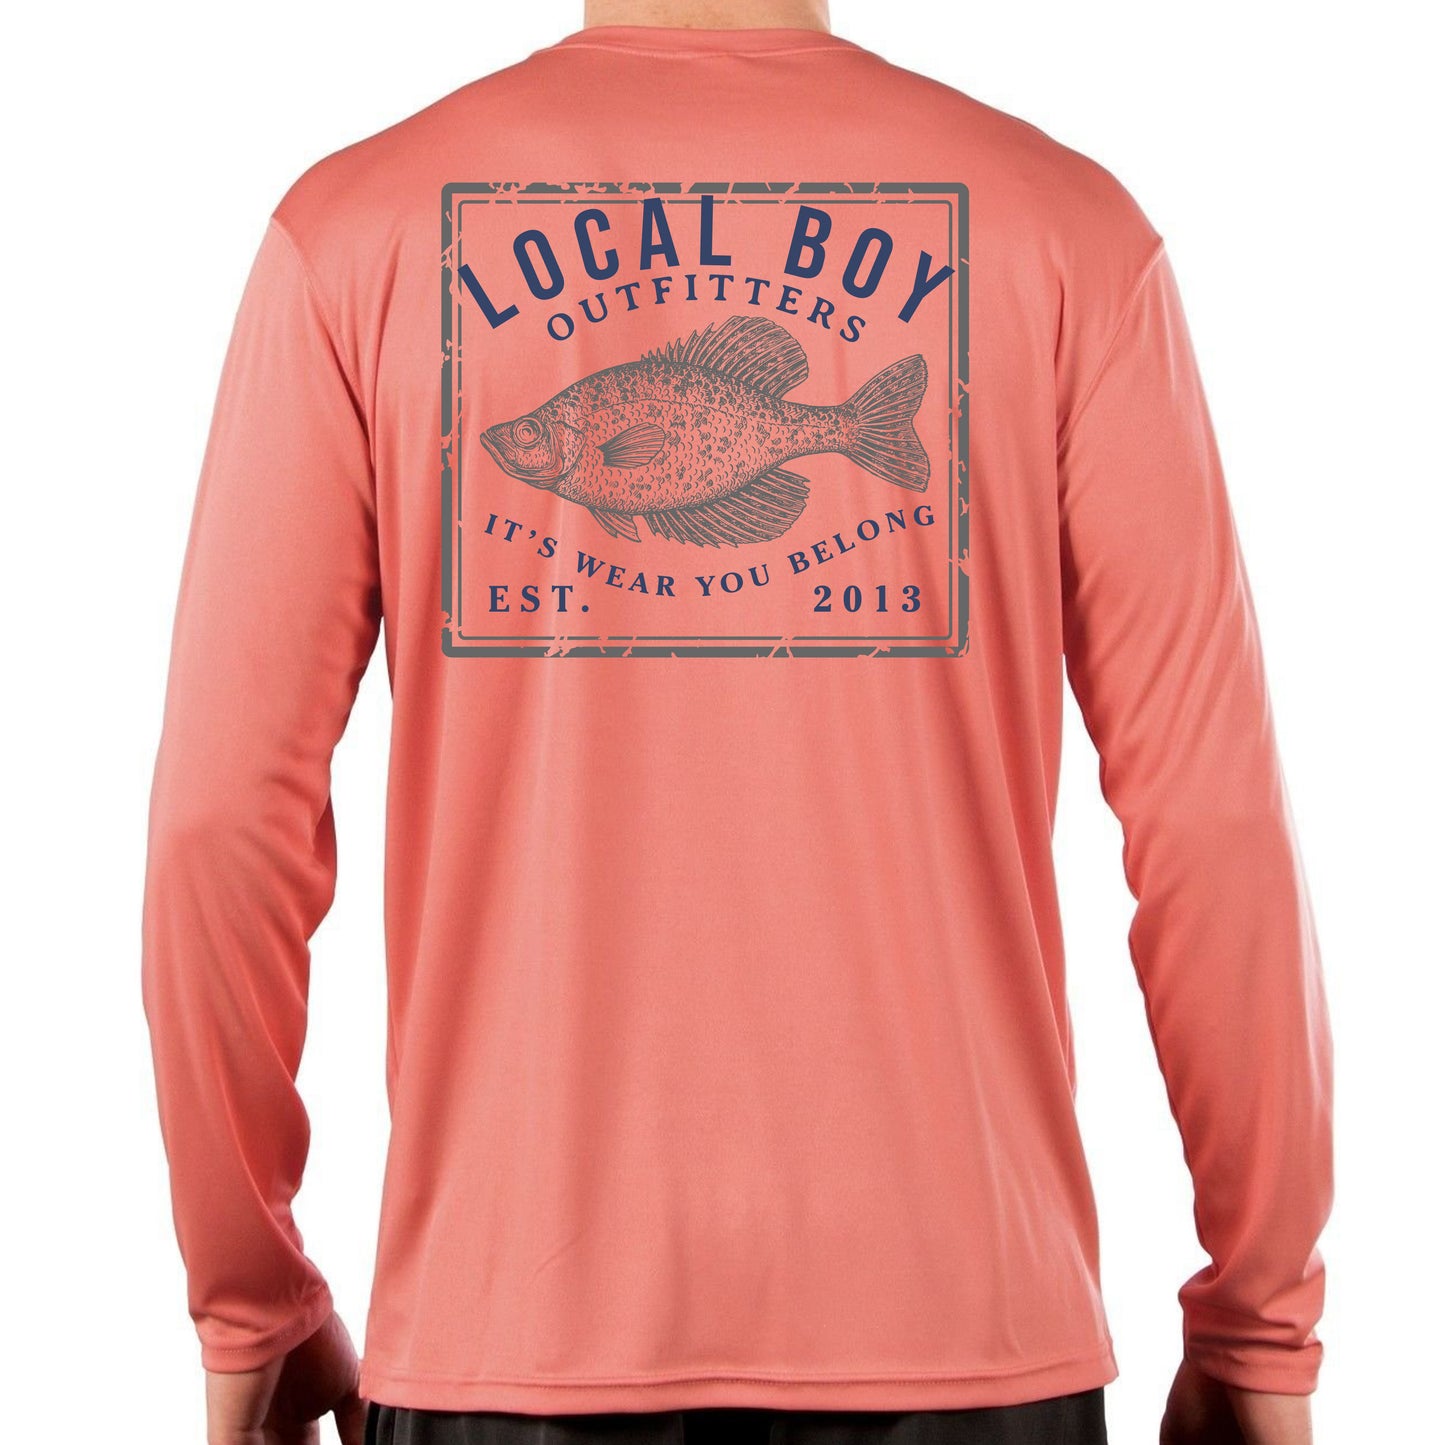 Holy Crappie Performance T-shirt